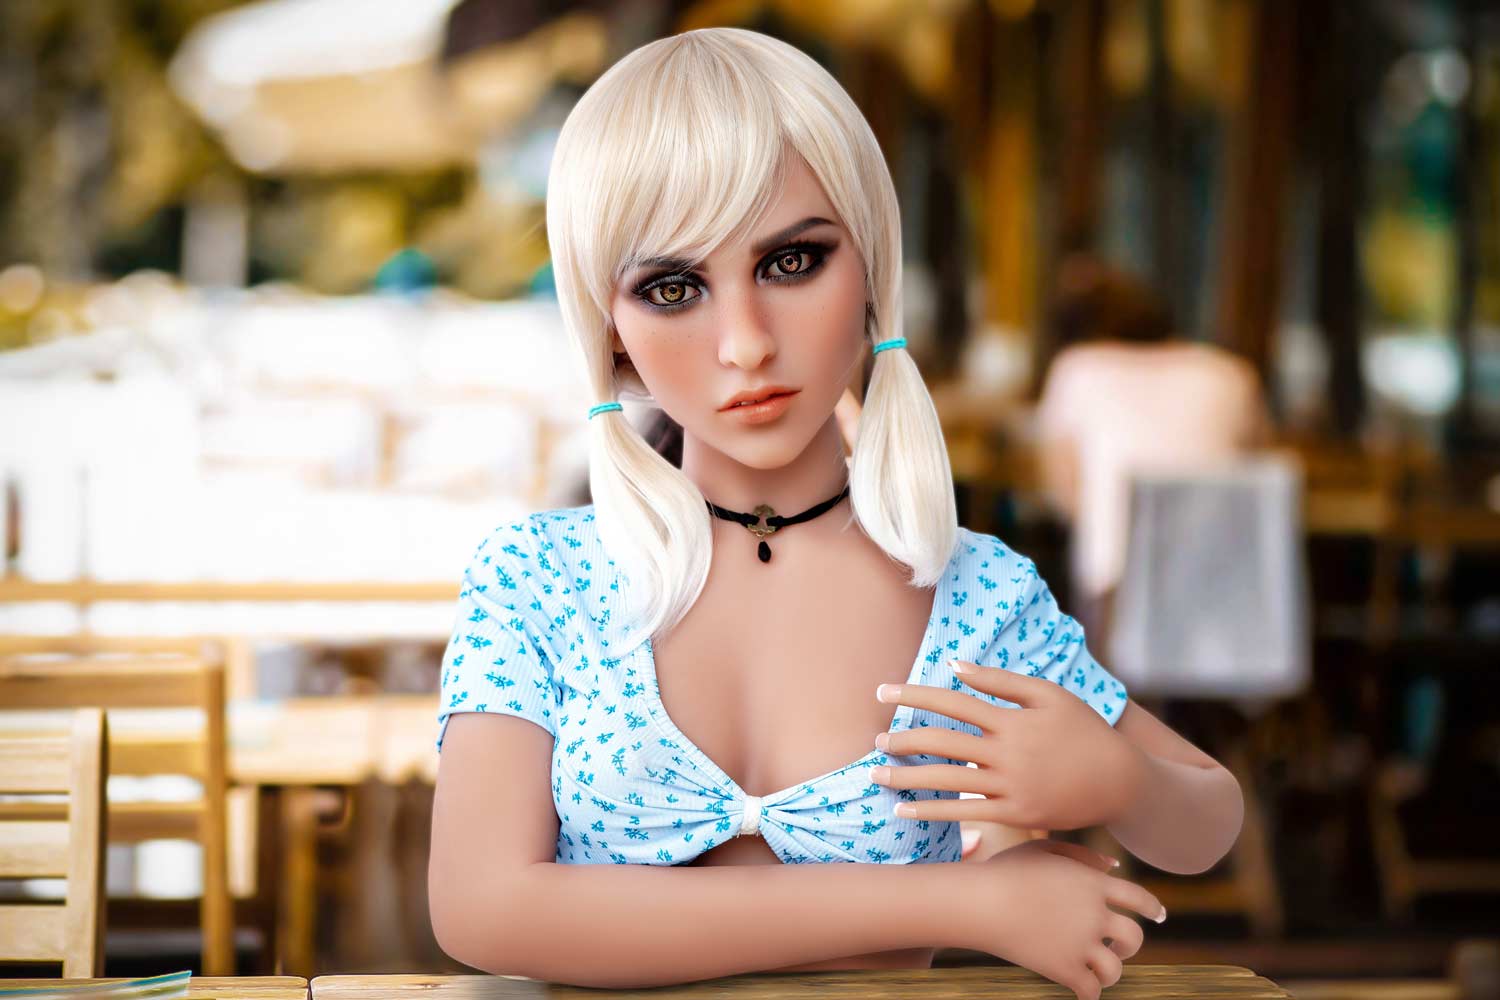 Sex doll with hands on the table